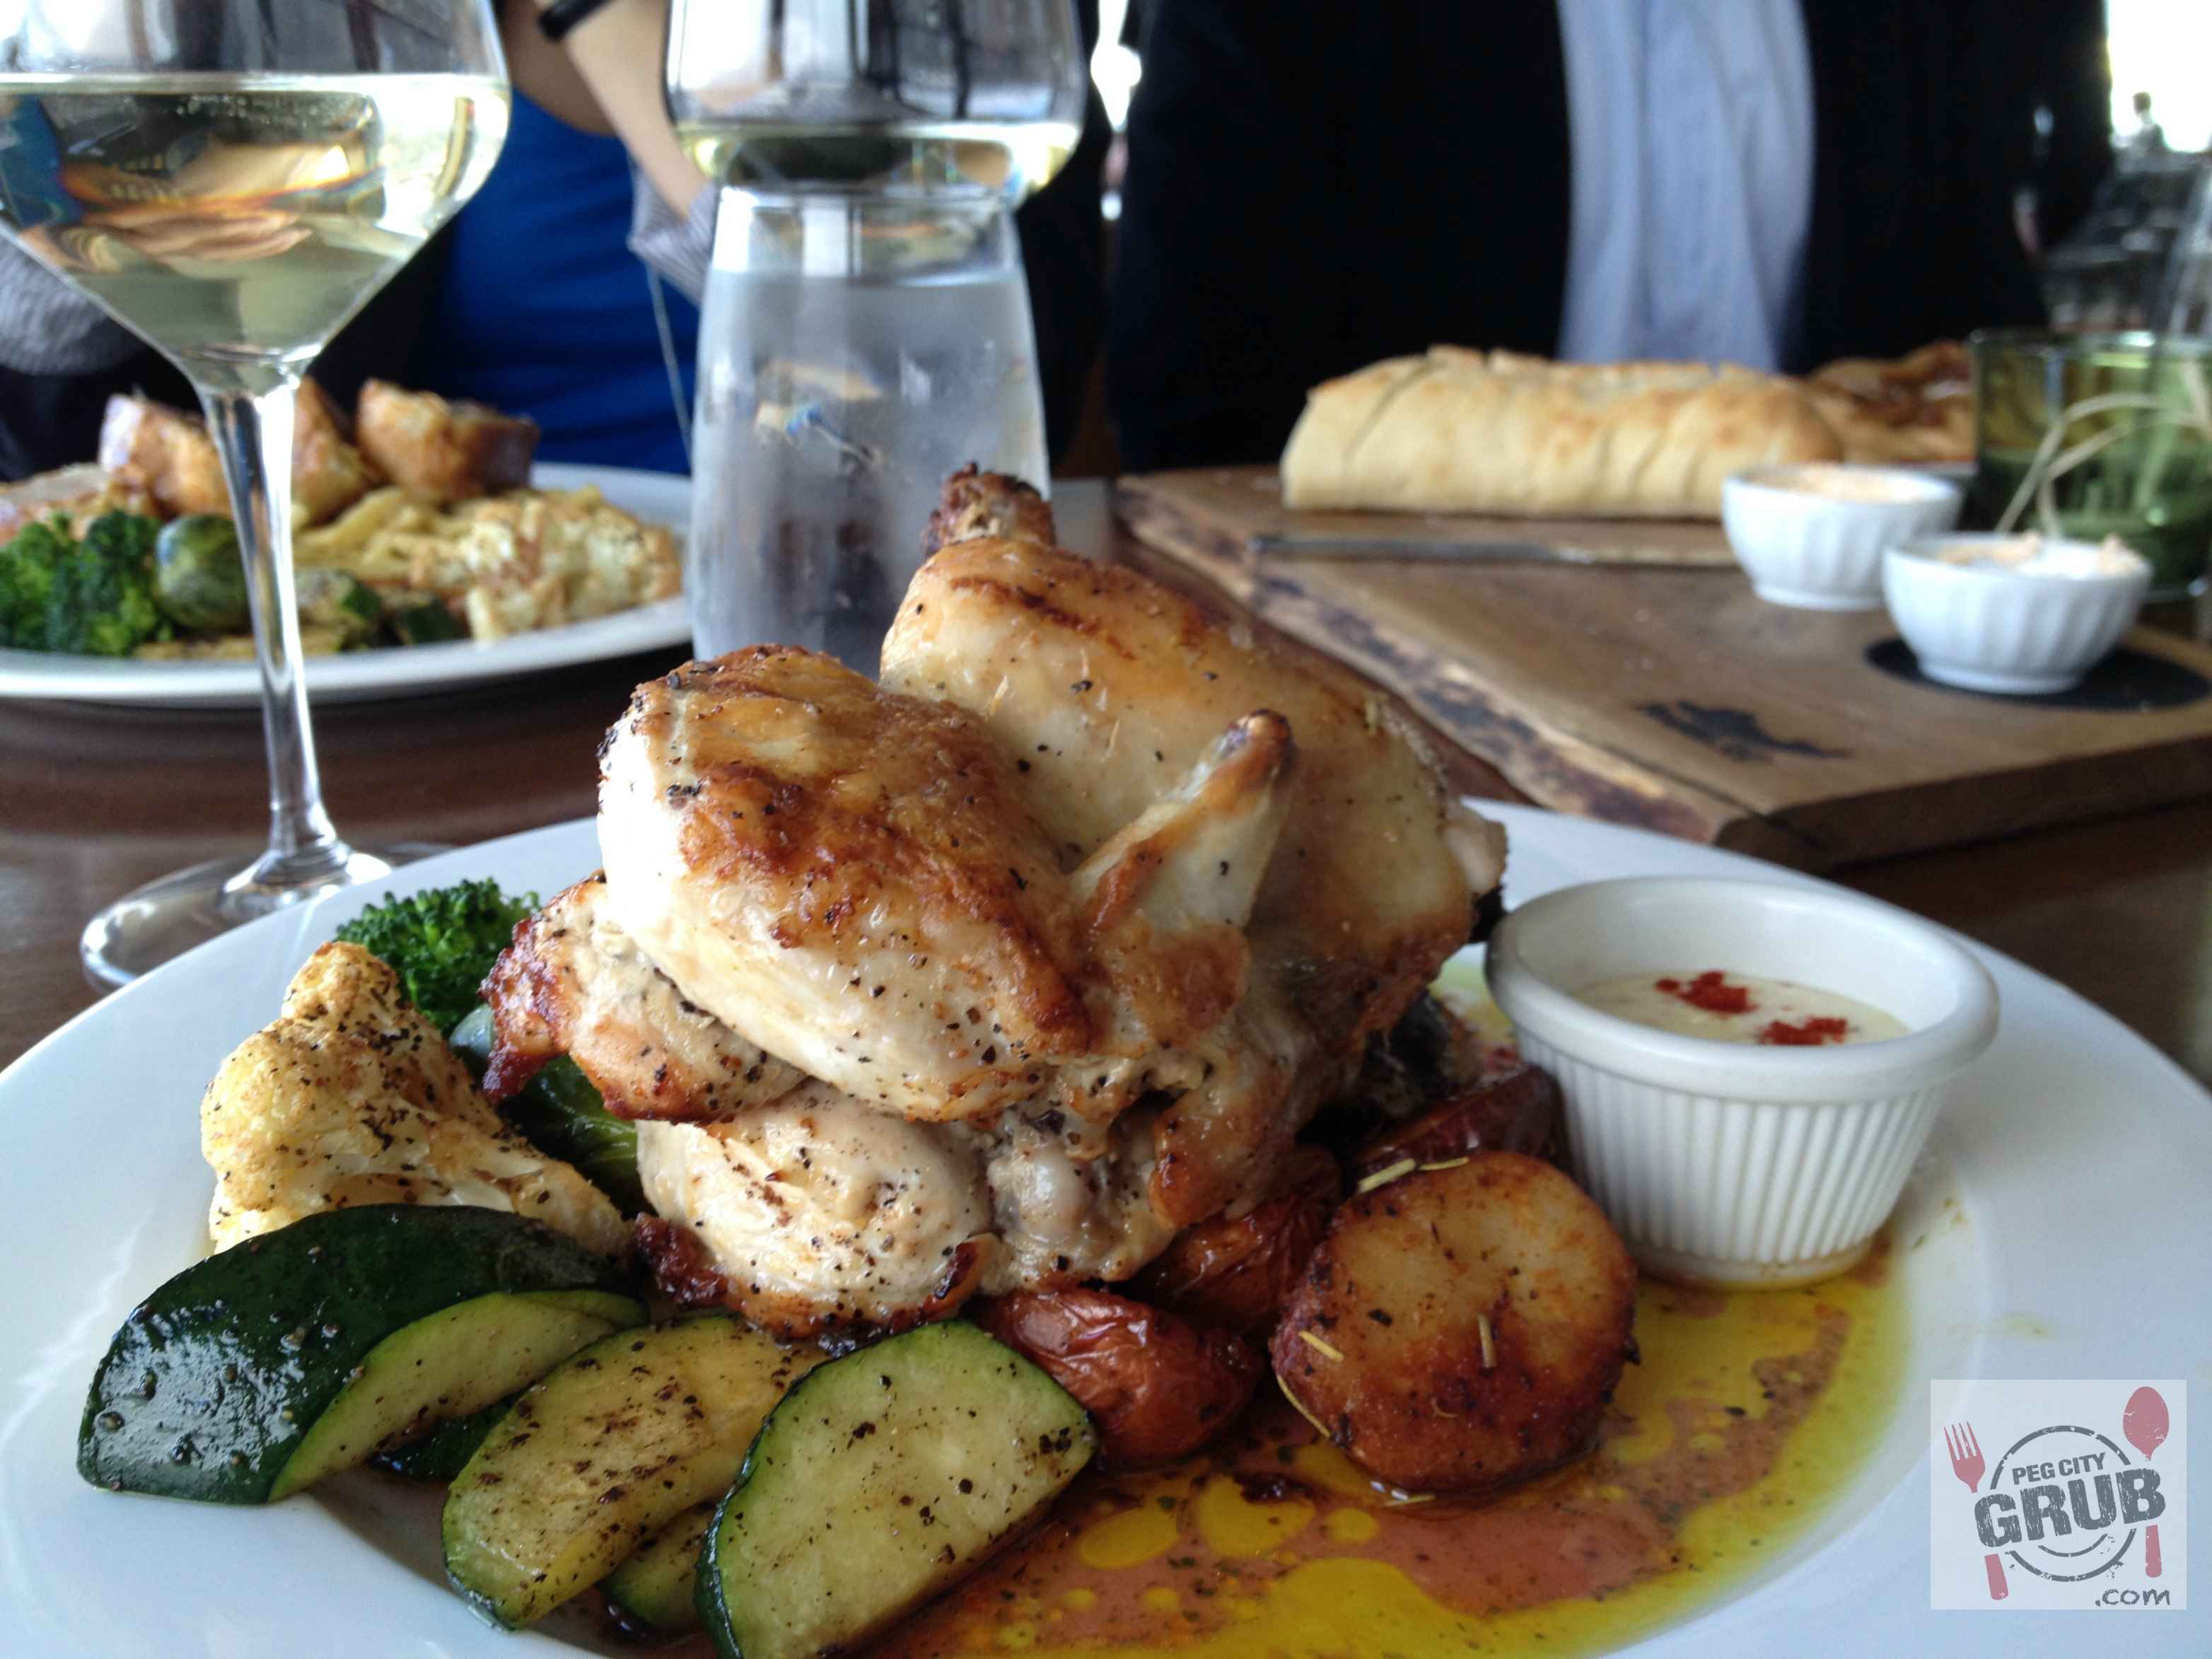 Cornish Game Hen and roasted vegetables at Prairie 360˚. (Photo by Robin Summerfield.)